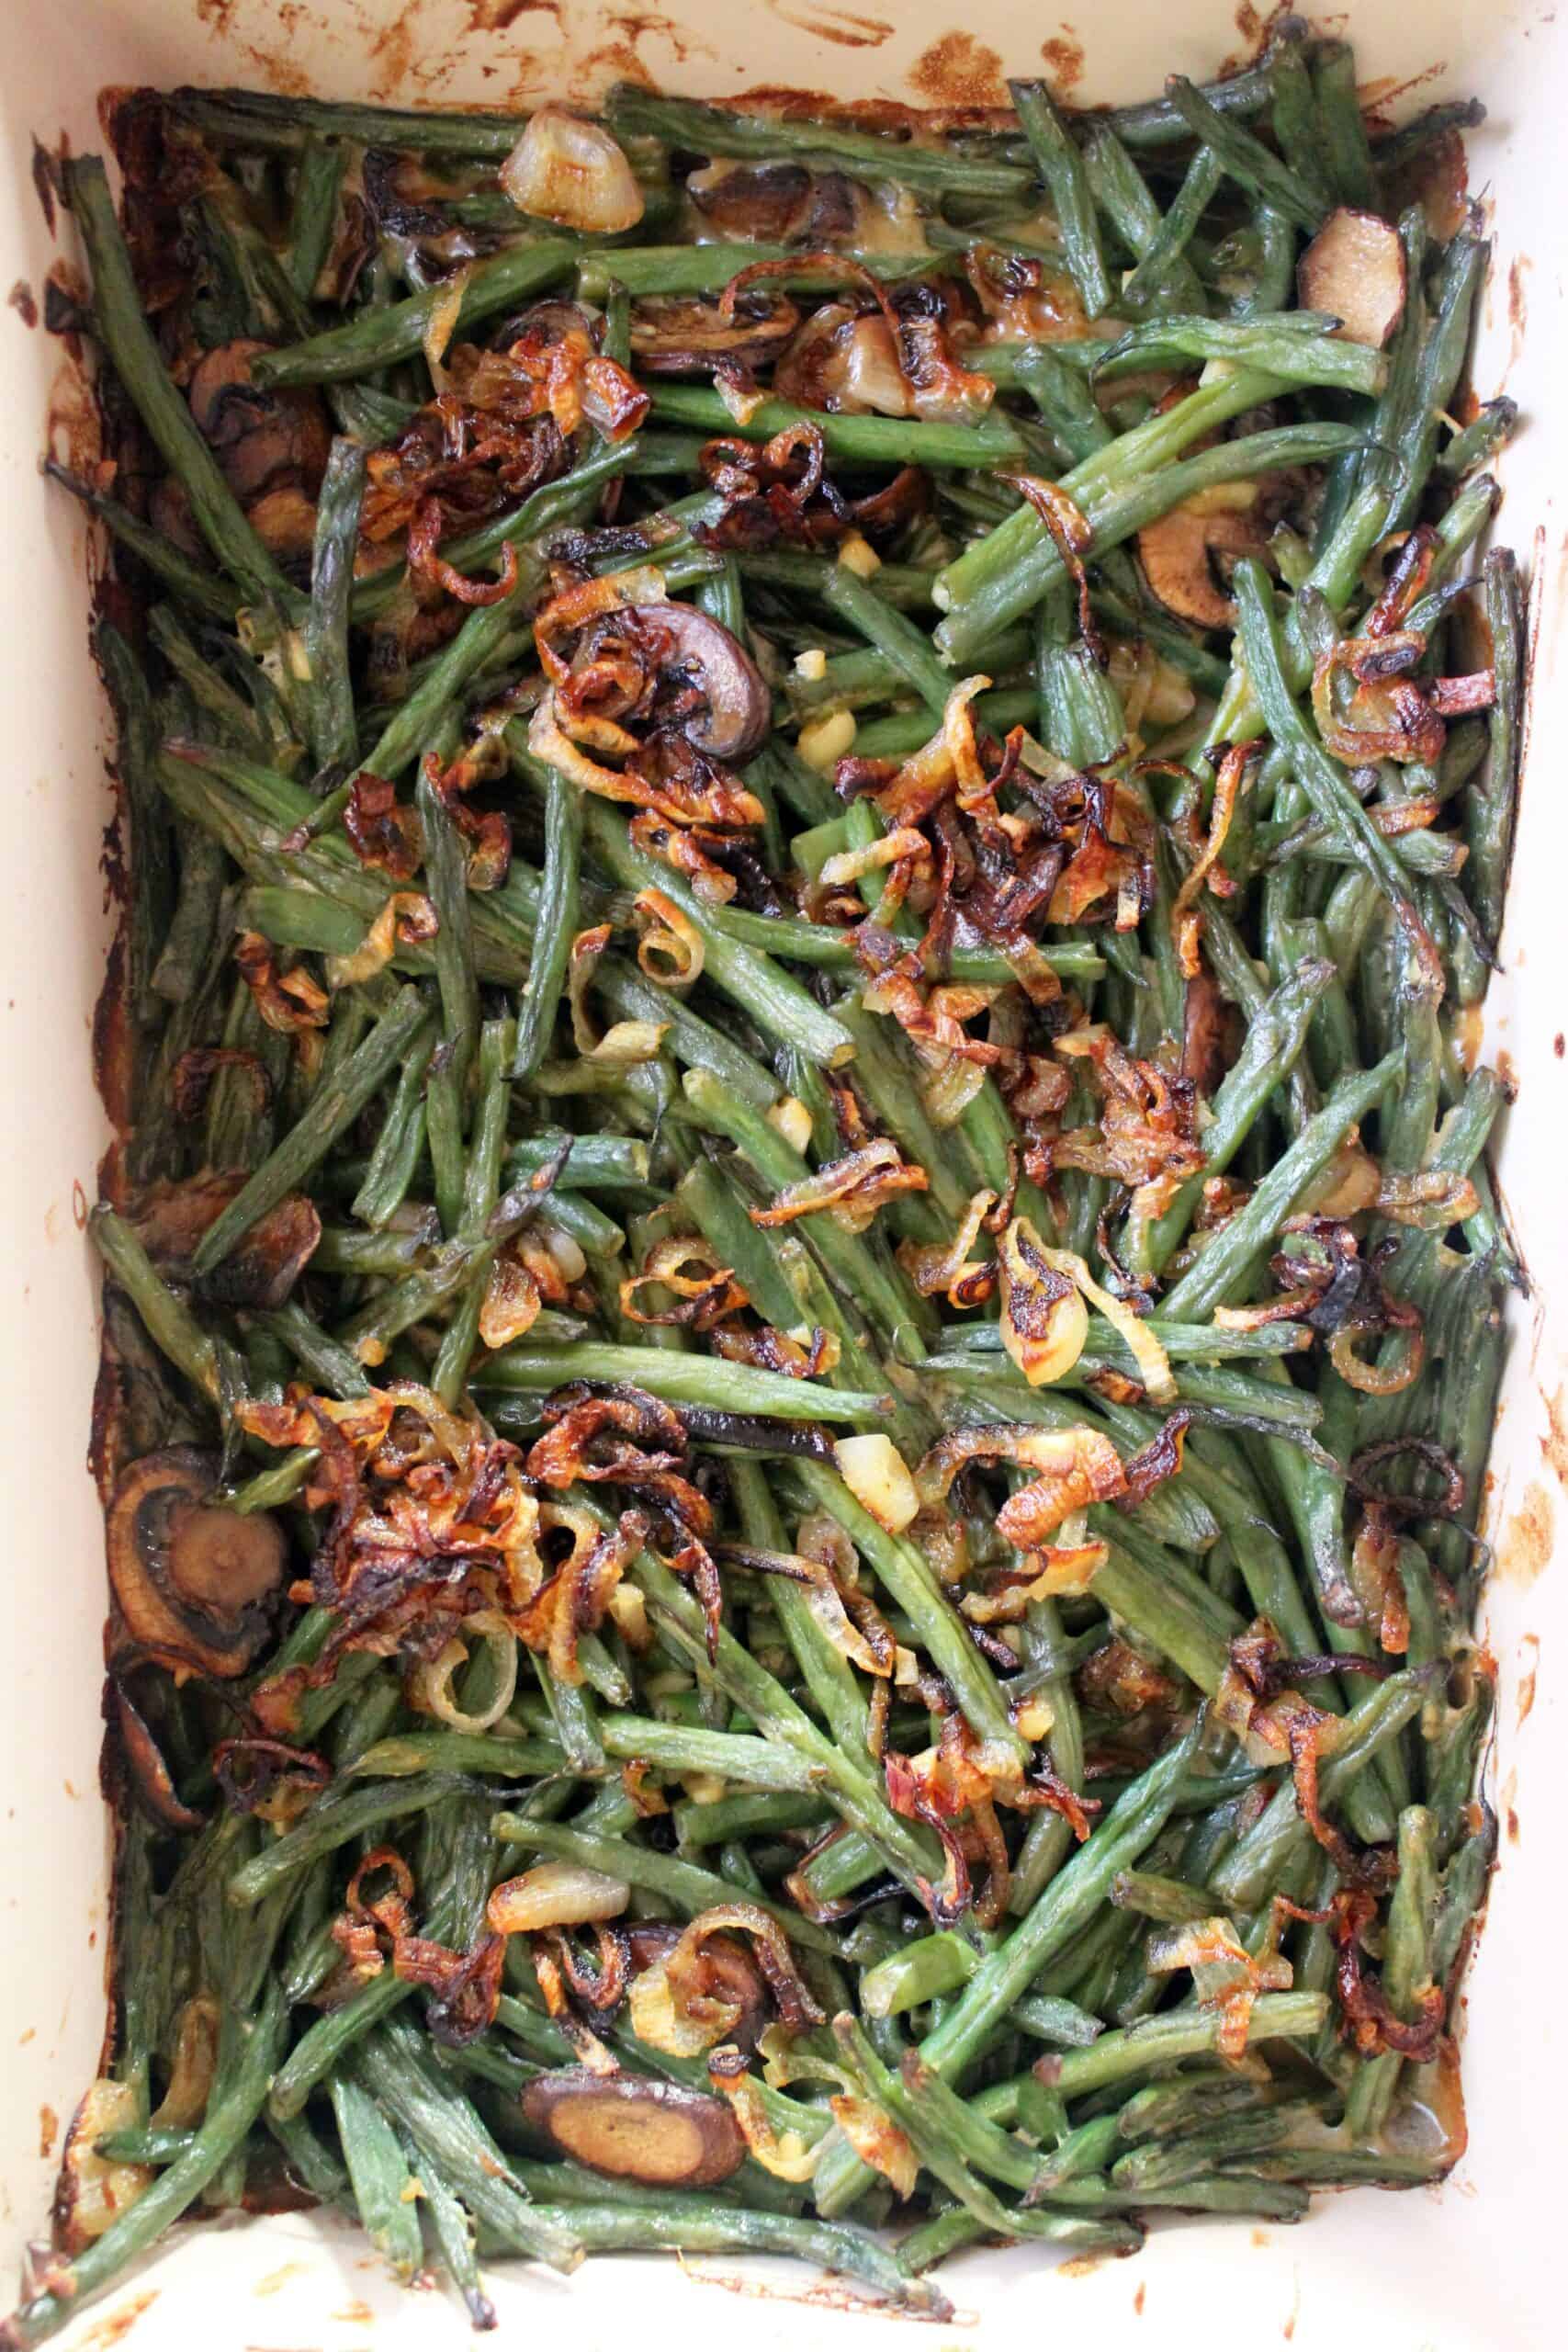 Top view of healthy green bean casserole with fresh shallot topping.